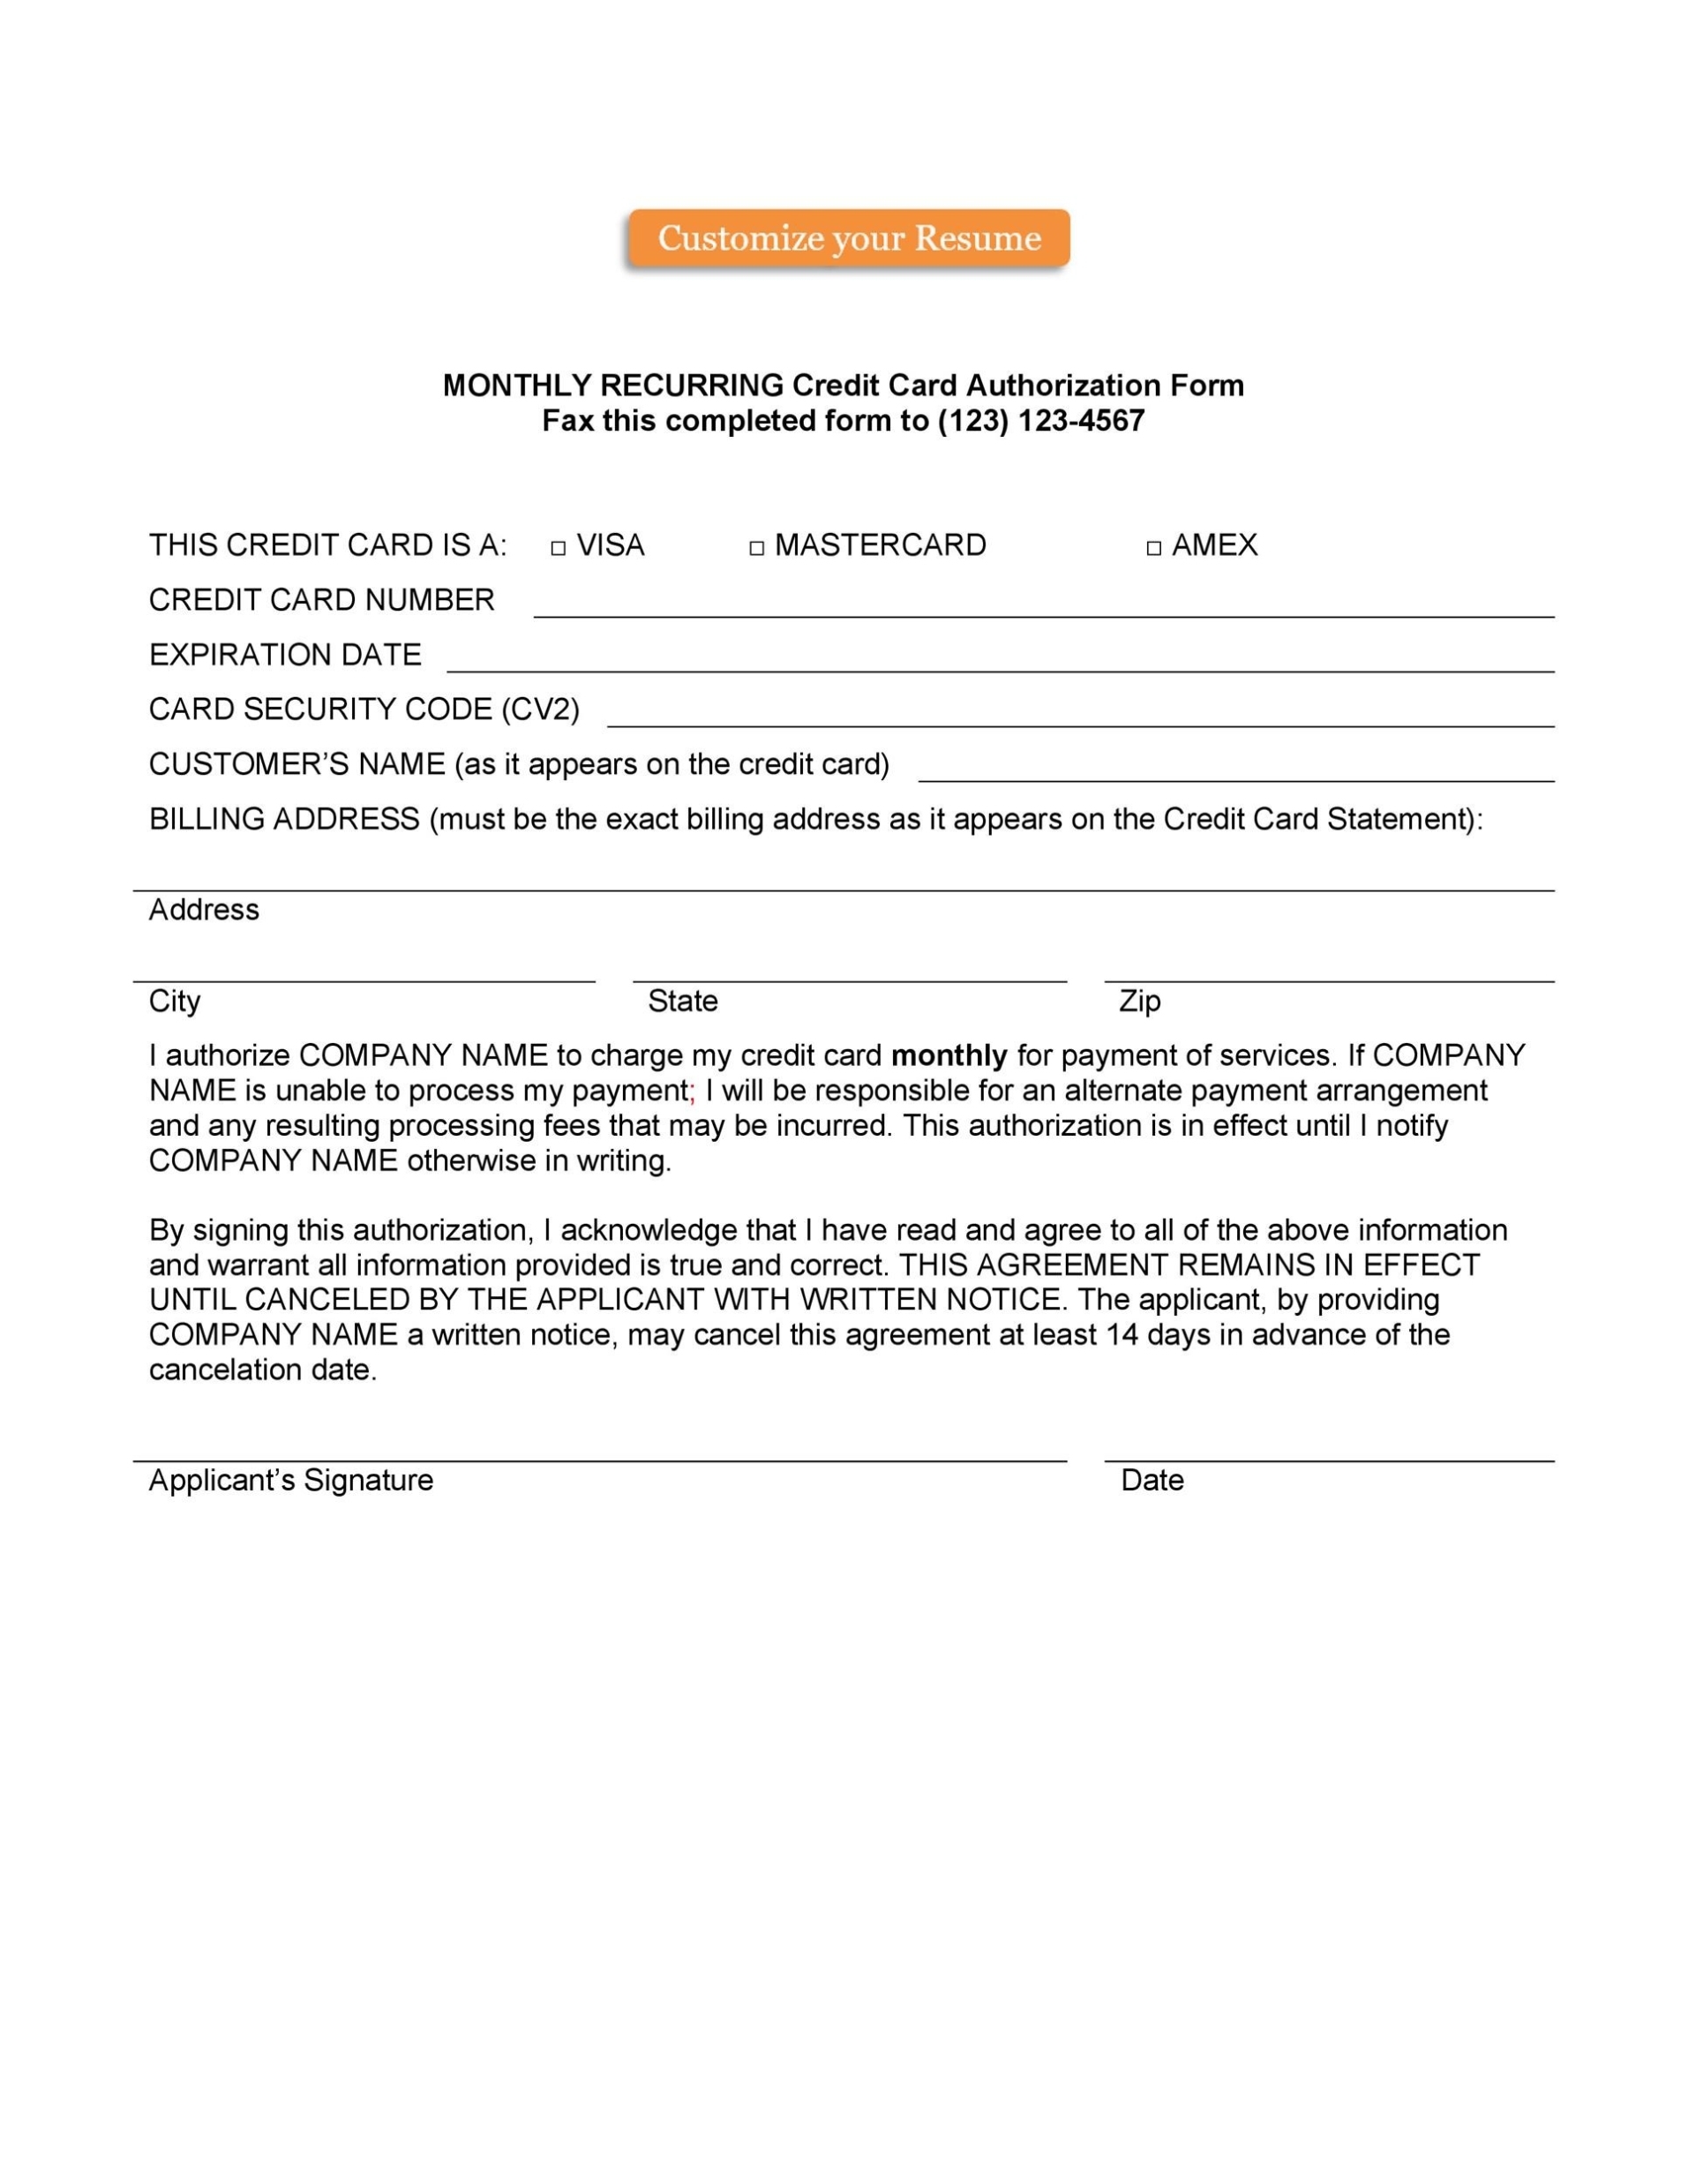 43 Credit Card Authorization Forms Templates {Ready-To-Use} pertaining to Credit Card Billing Authorization Form Template